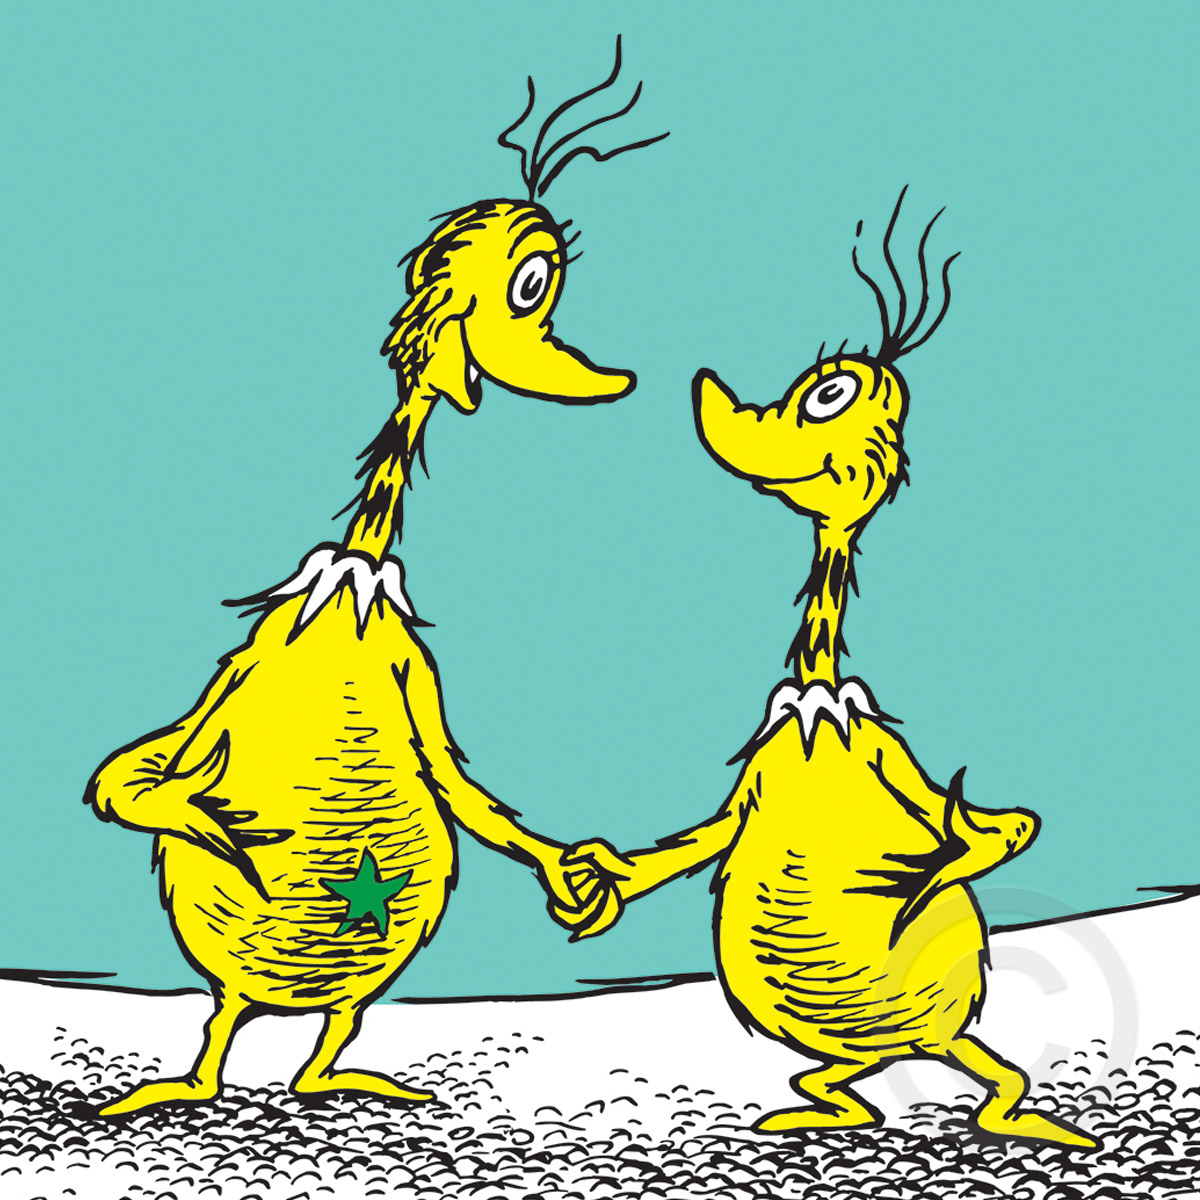 One thing before you share. the hidden meaning in Dr.Suess books. 